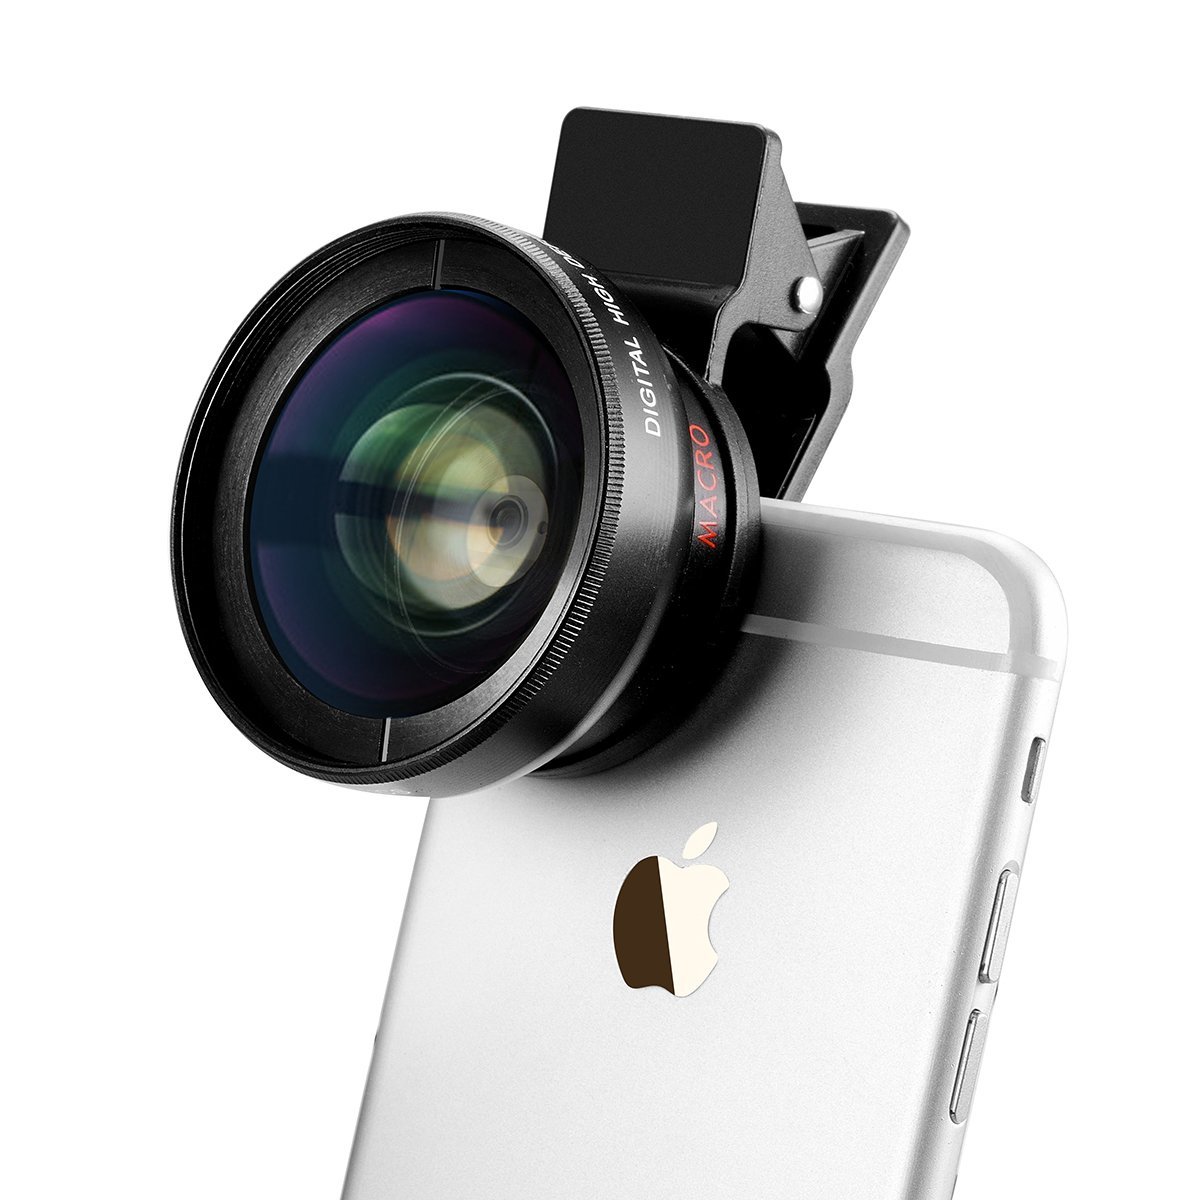 Pro camera lens for your smartphone - $30 Works with iPhone 5,6, Samsung Galaxy, and a few others